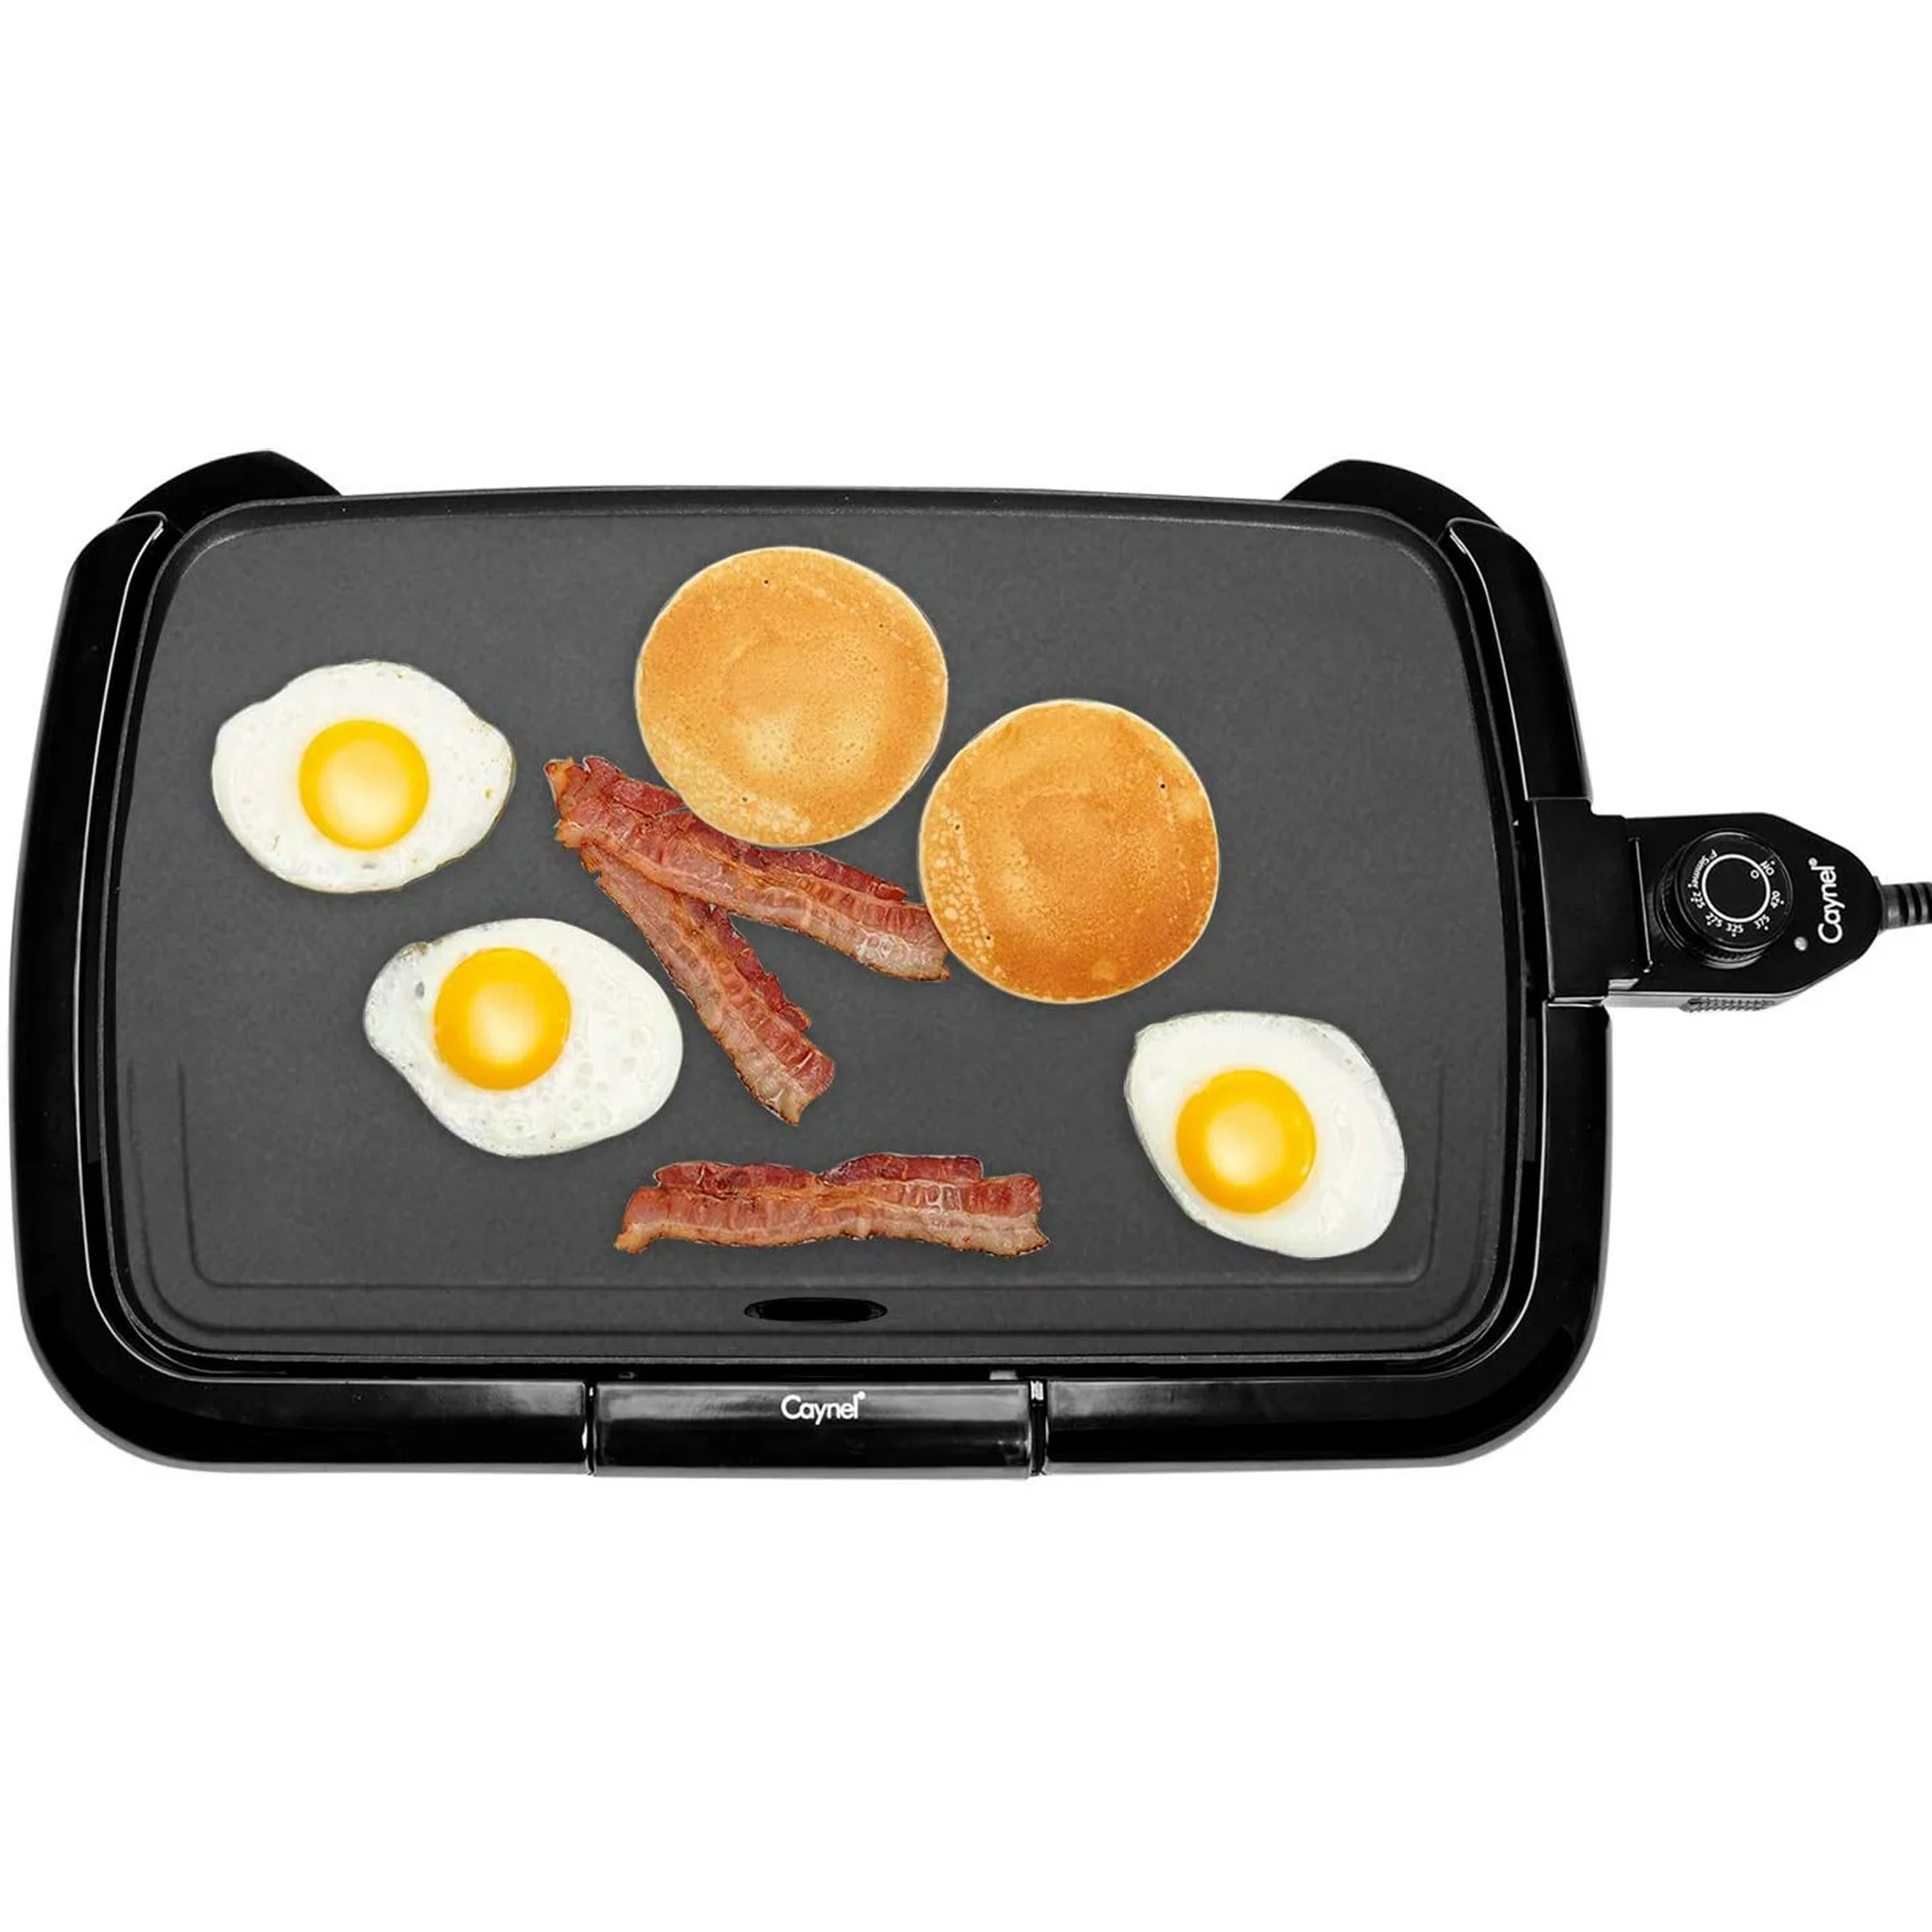 Caynel 16”x10” Professional Electric Griddle with Adjustable Temperature... - $150.00